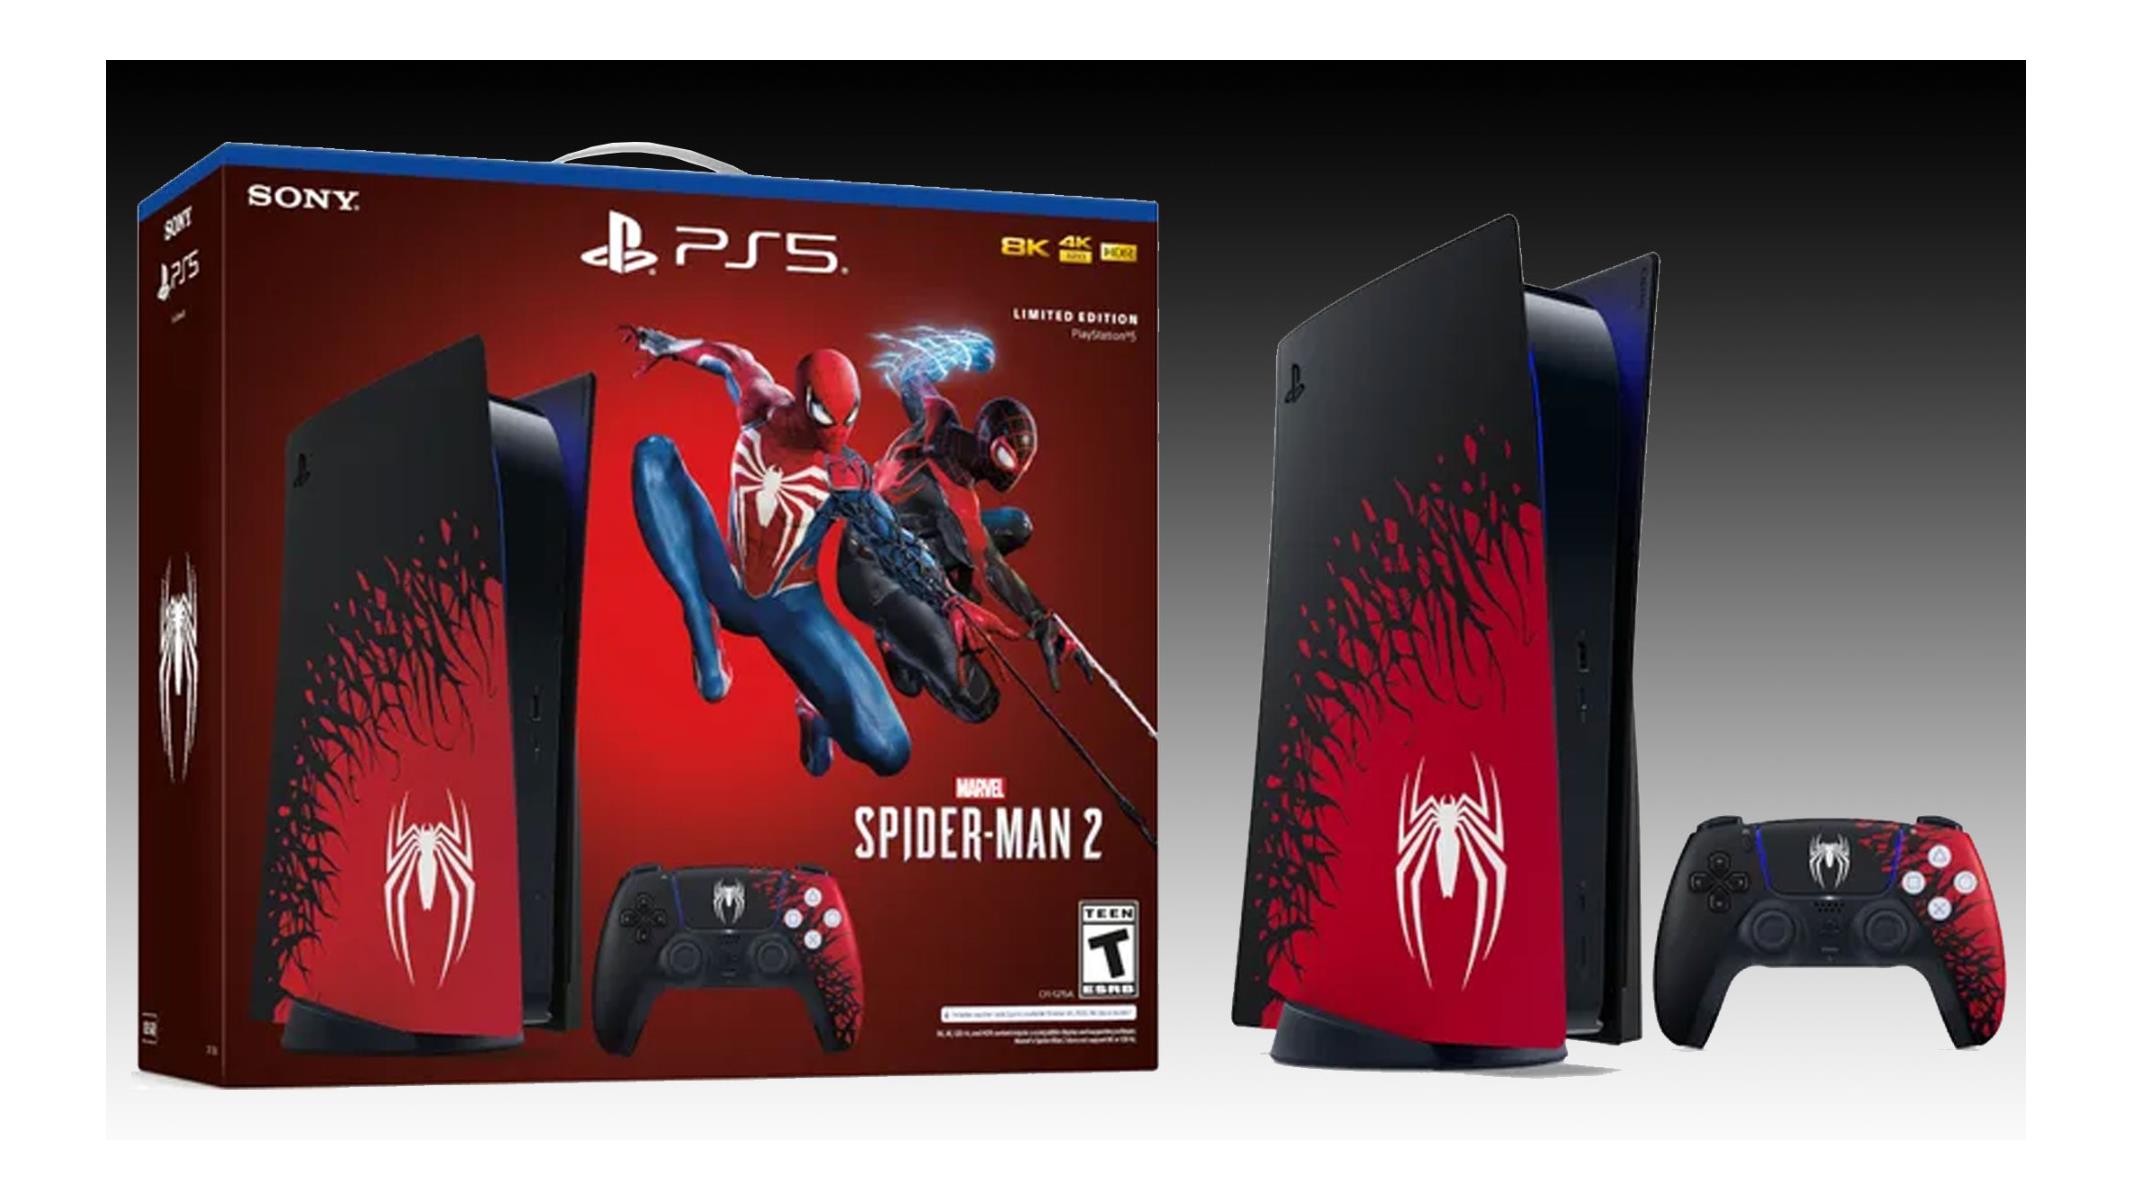 Unboxing SPIDER-MAN 2 Limited Edition PS5 Console 